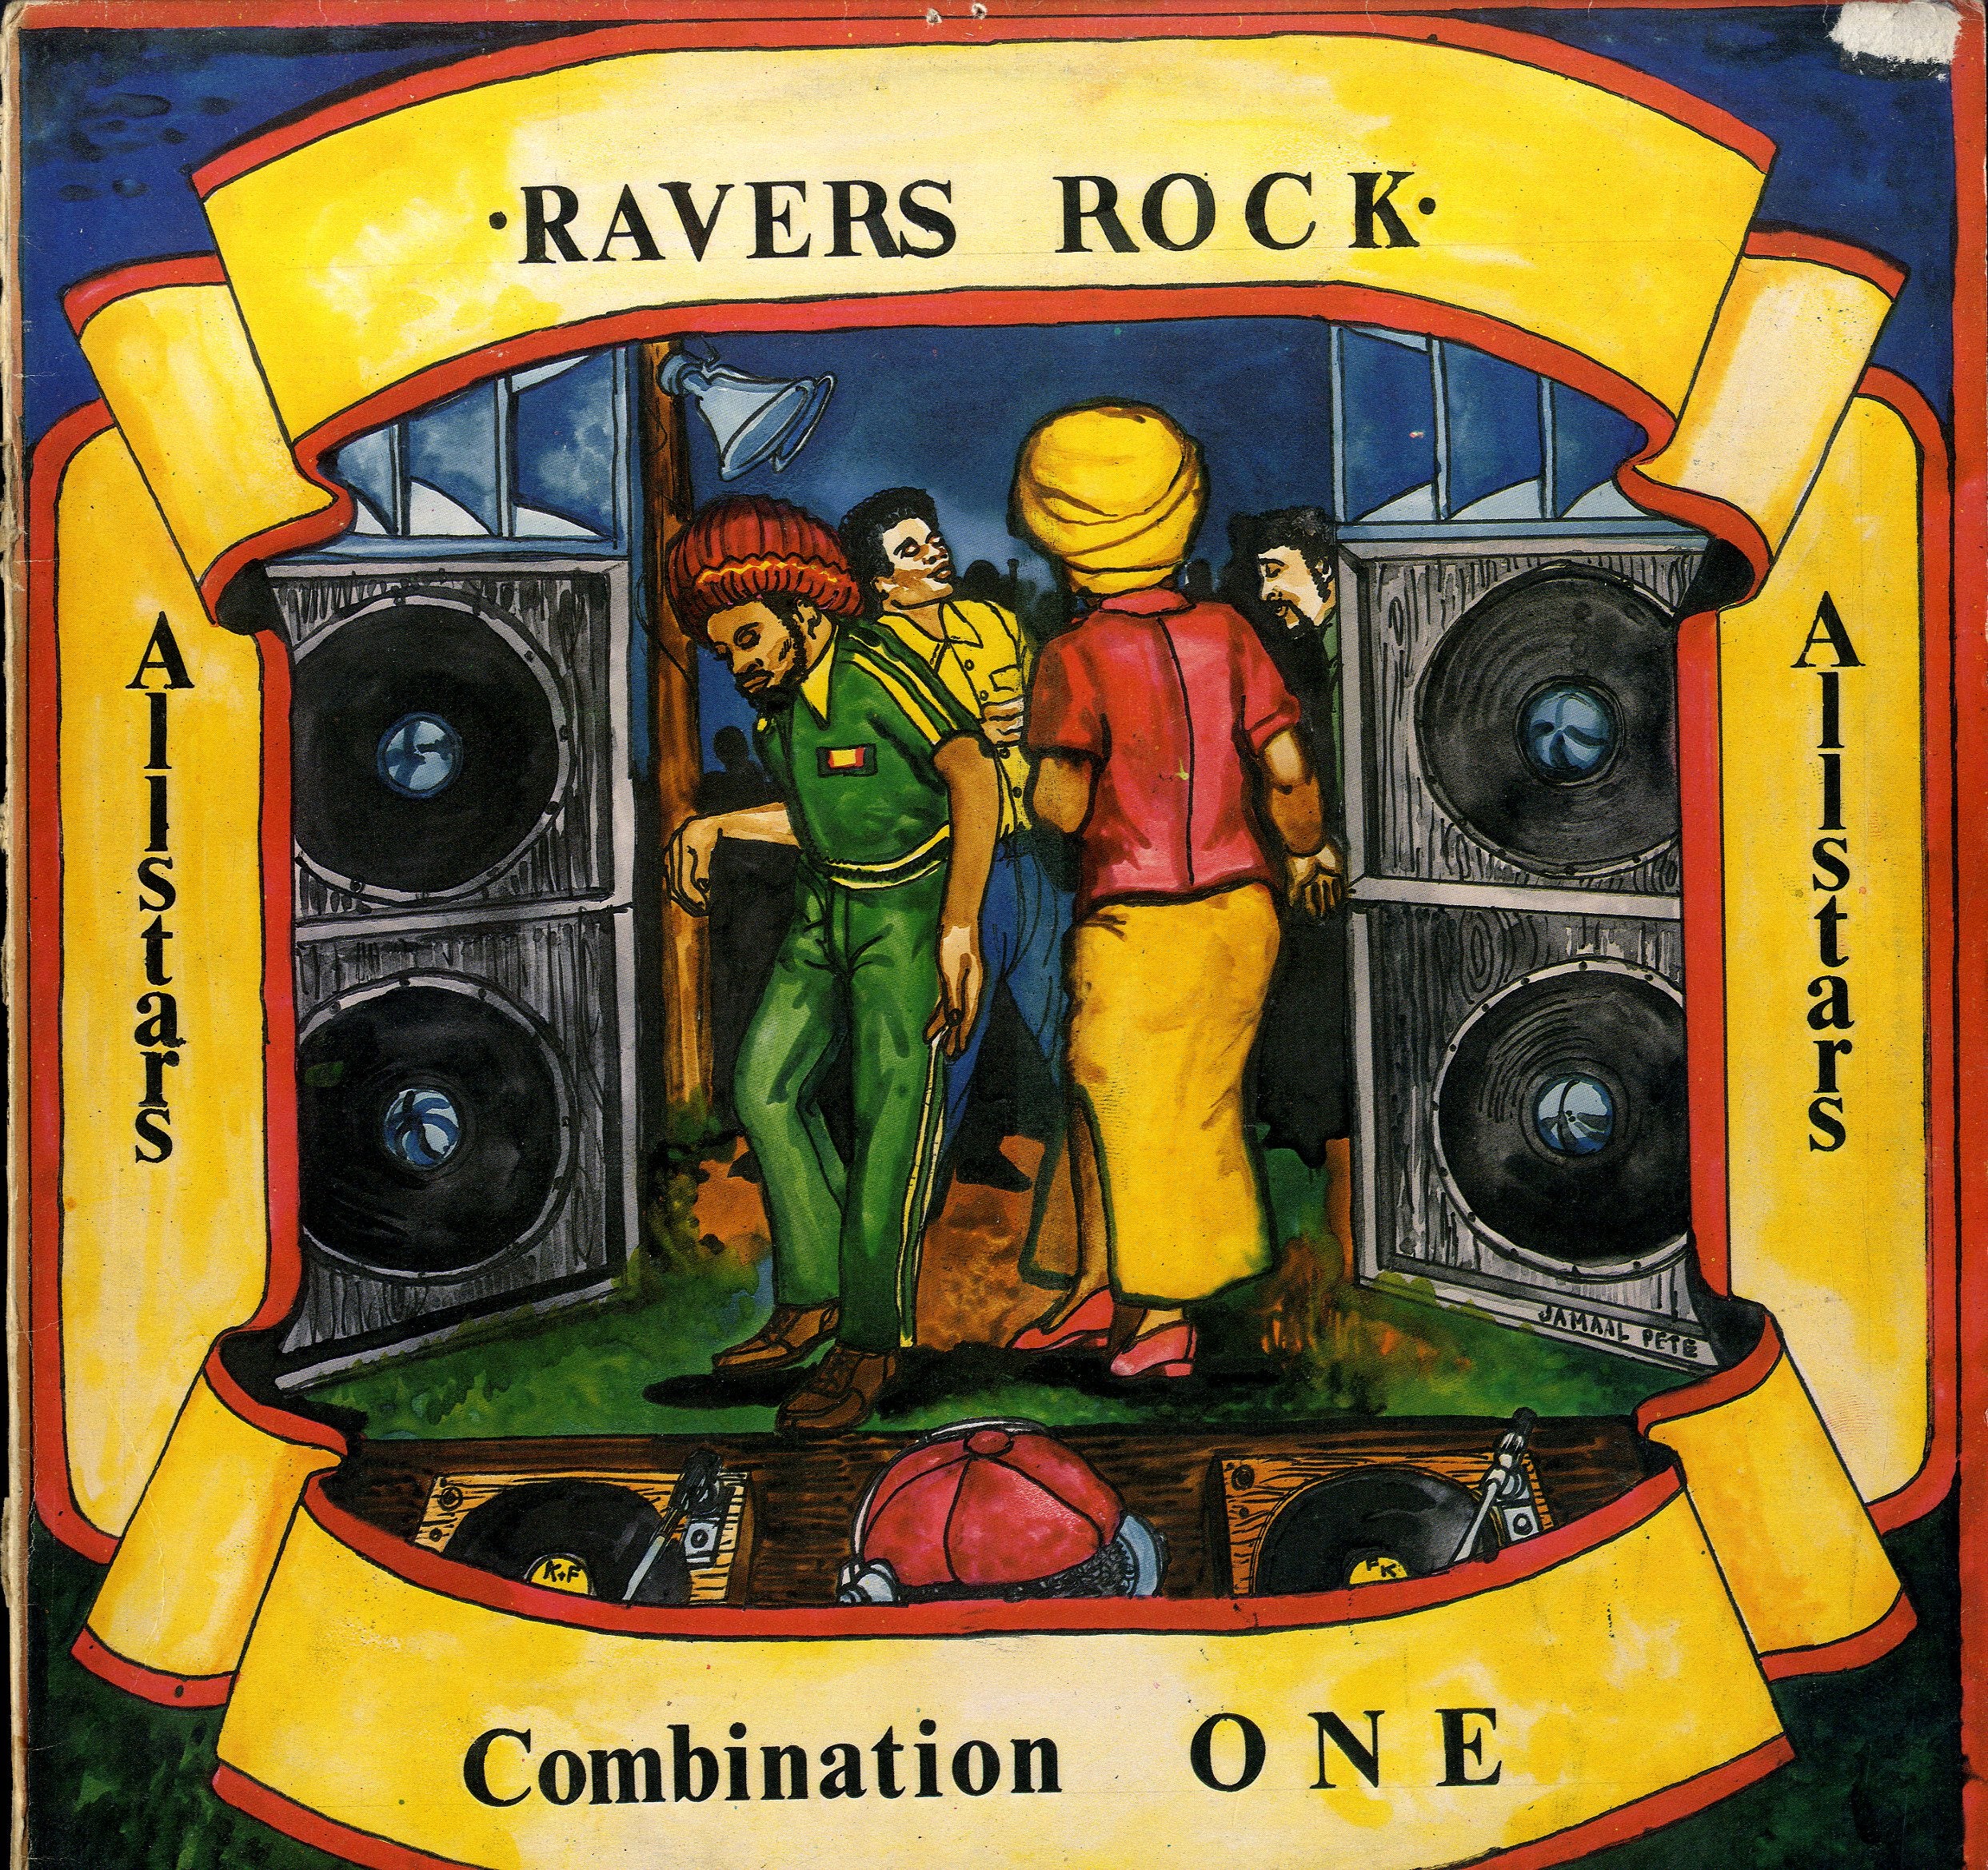 V.A. [Ravers Rock Combination One]